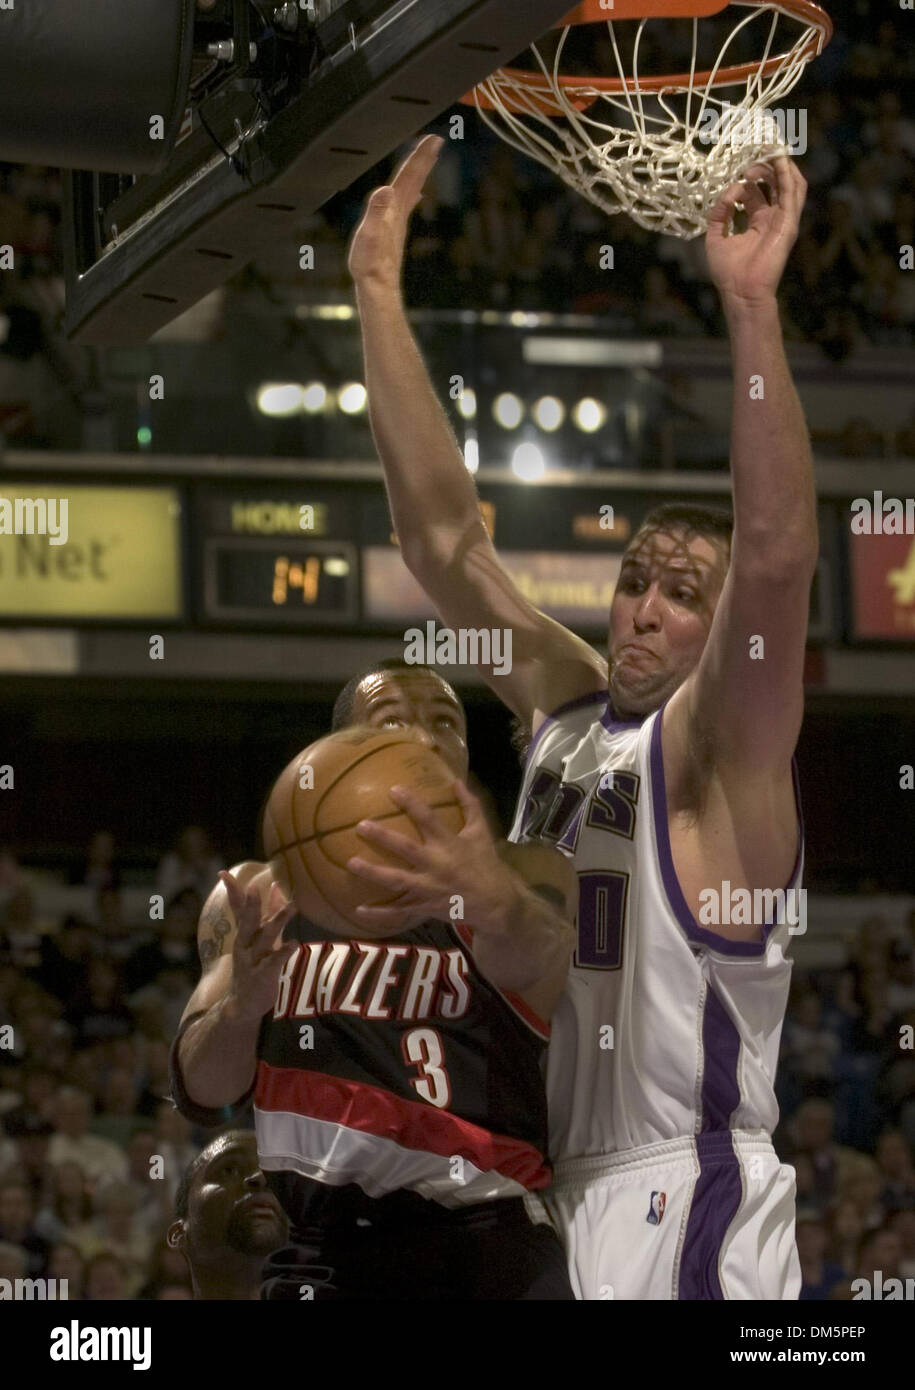 Mar 22, 2005; Sacramento, CA, USA; Sacramento Kings center Greg Ostertag attempts to block a shot by Damon Stoudamire of the Portland Trailblazers during the second quarter of their game at Arco Arena. The Kings won 112-93. Stock Photo